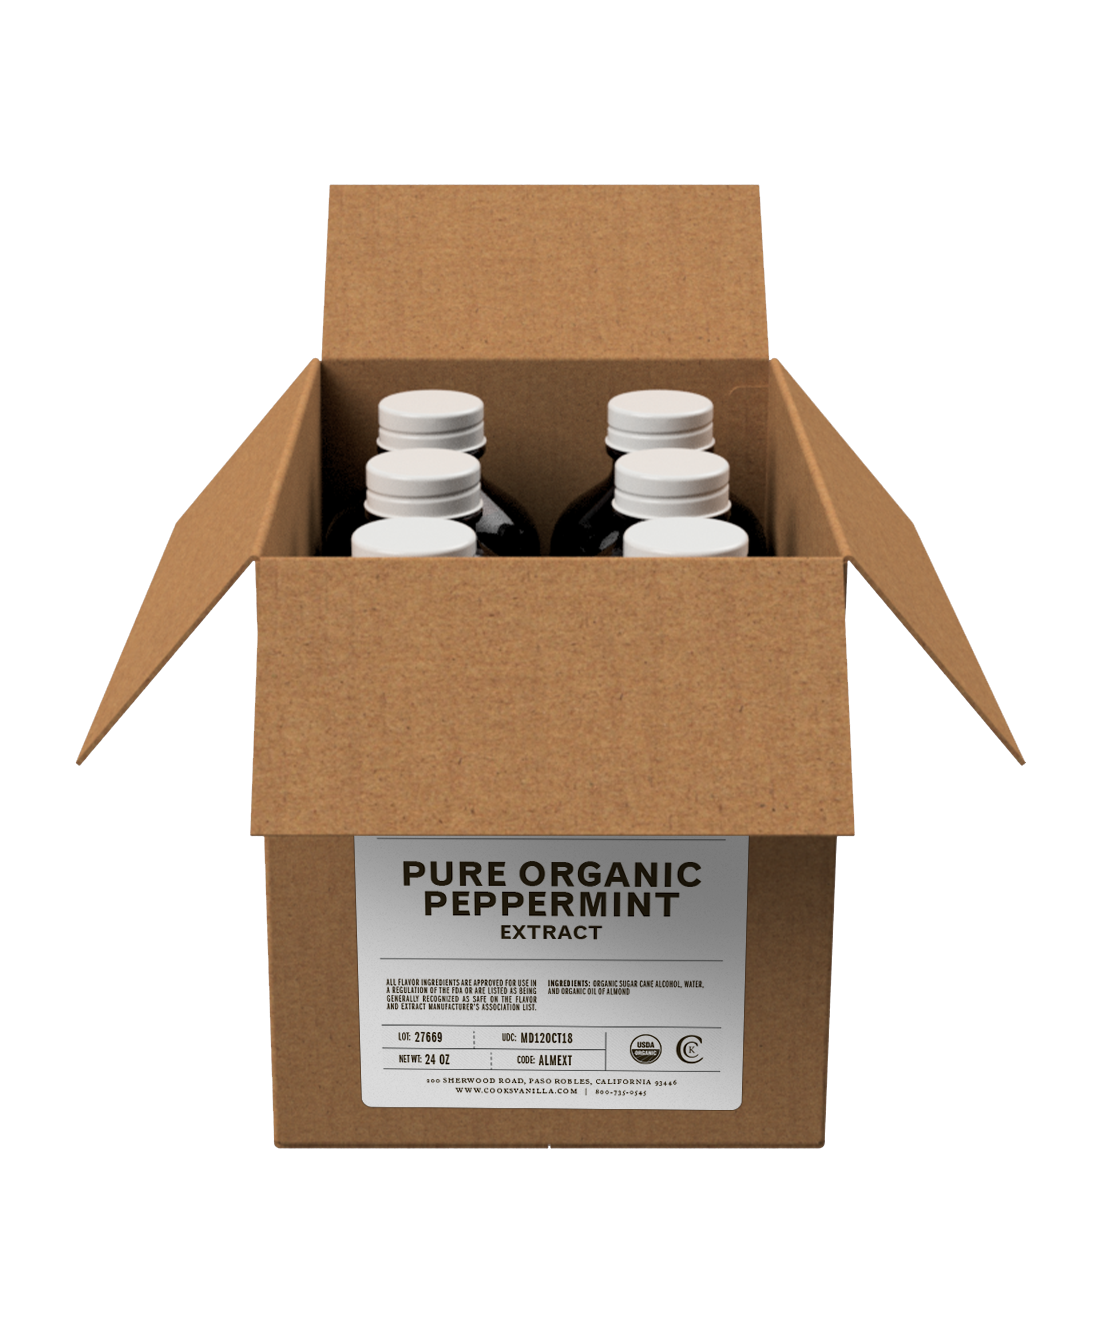 Flavoring | Organic Peppermint Extract (Pure) | Packs and Cases